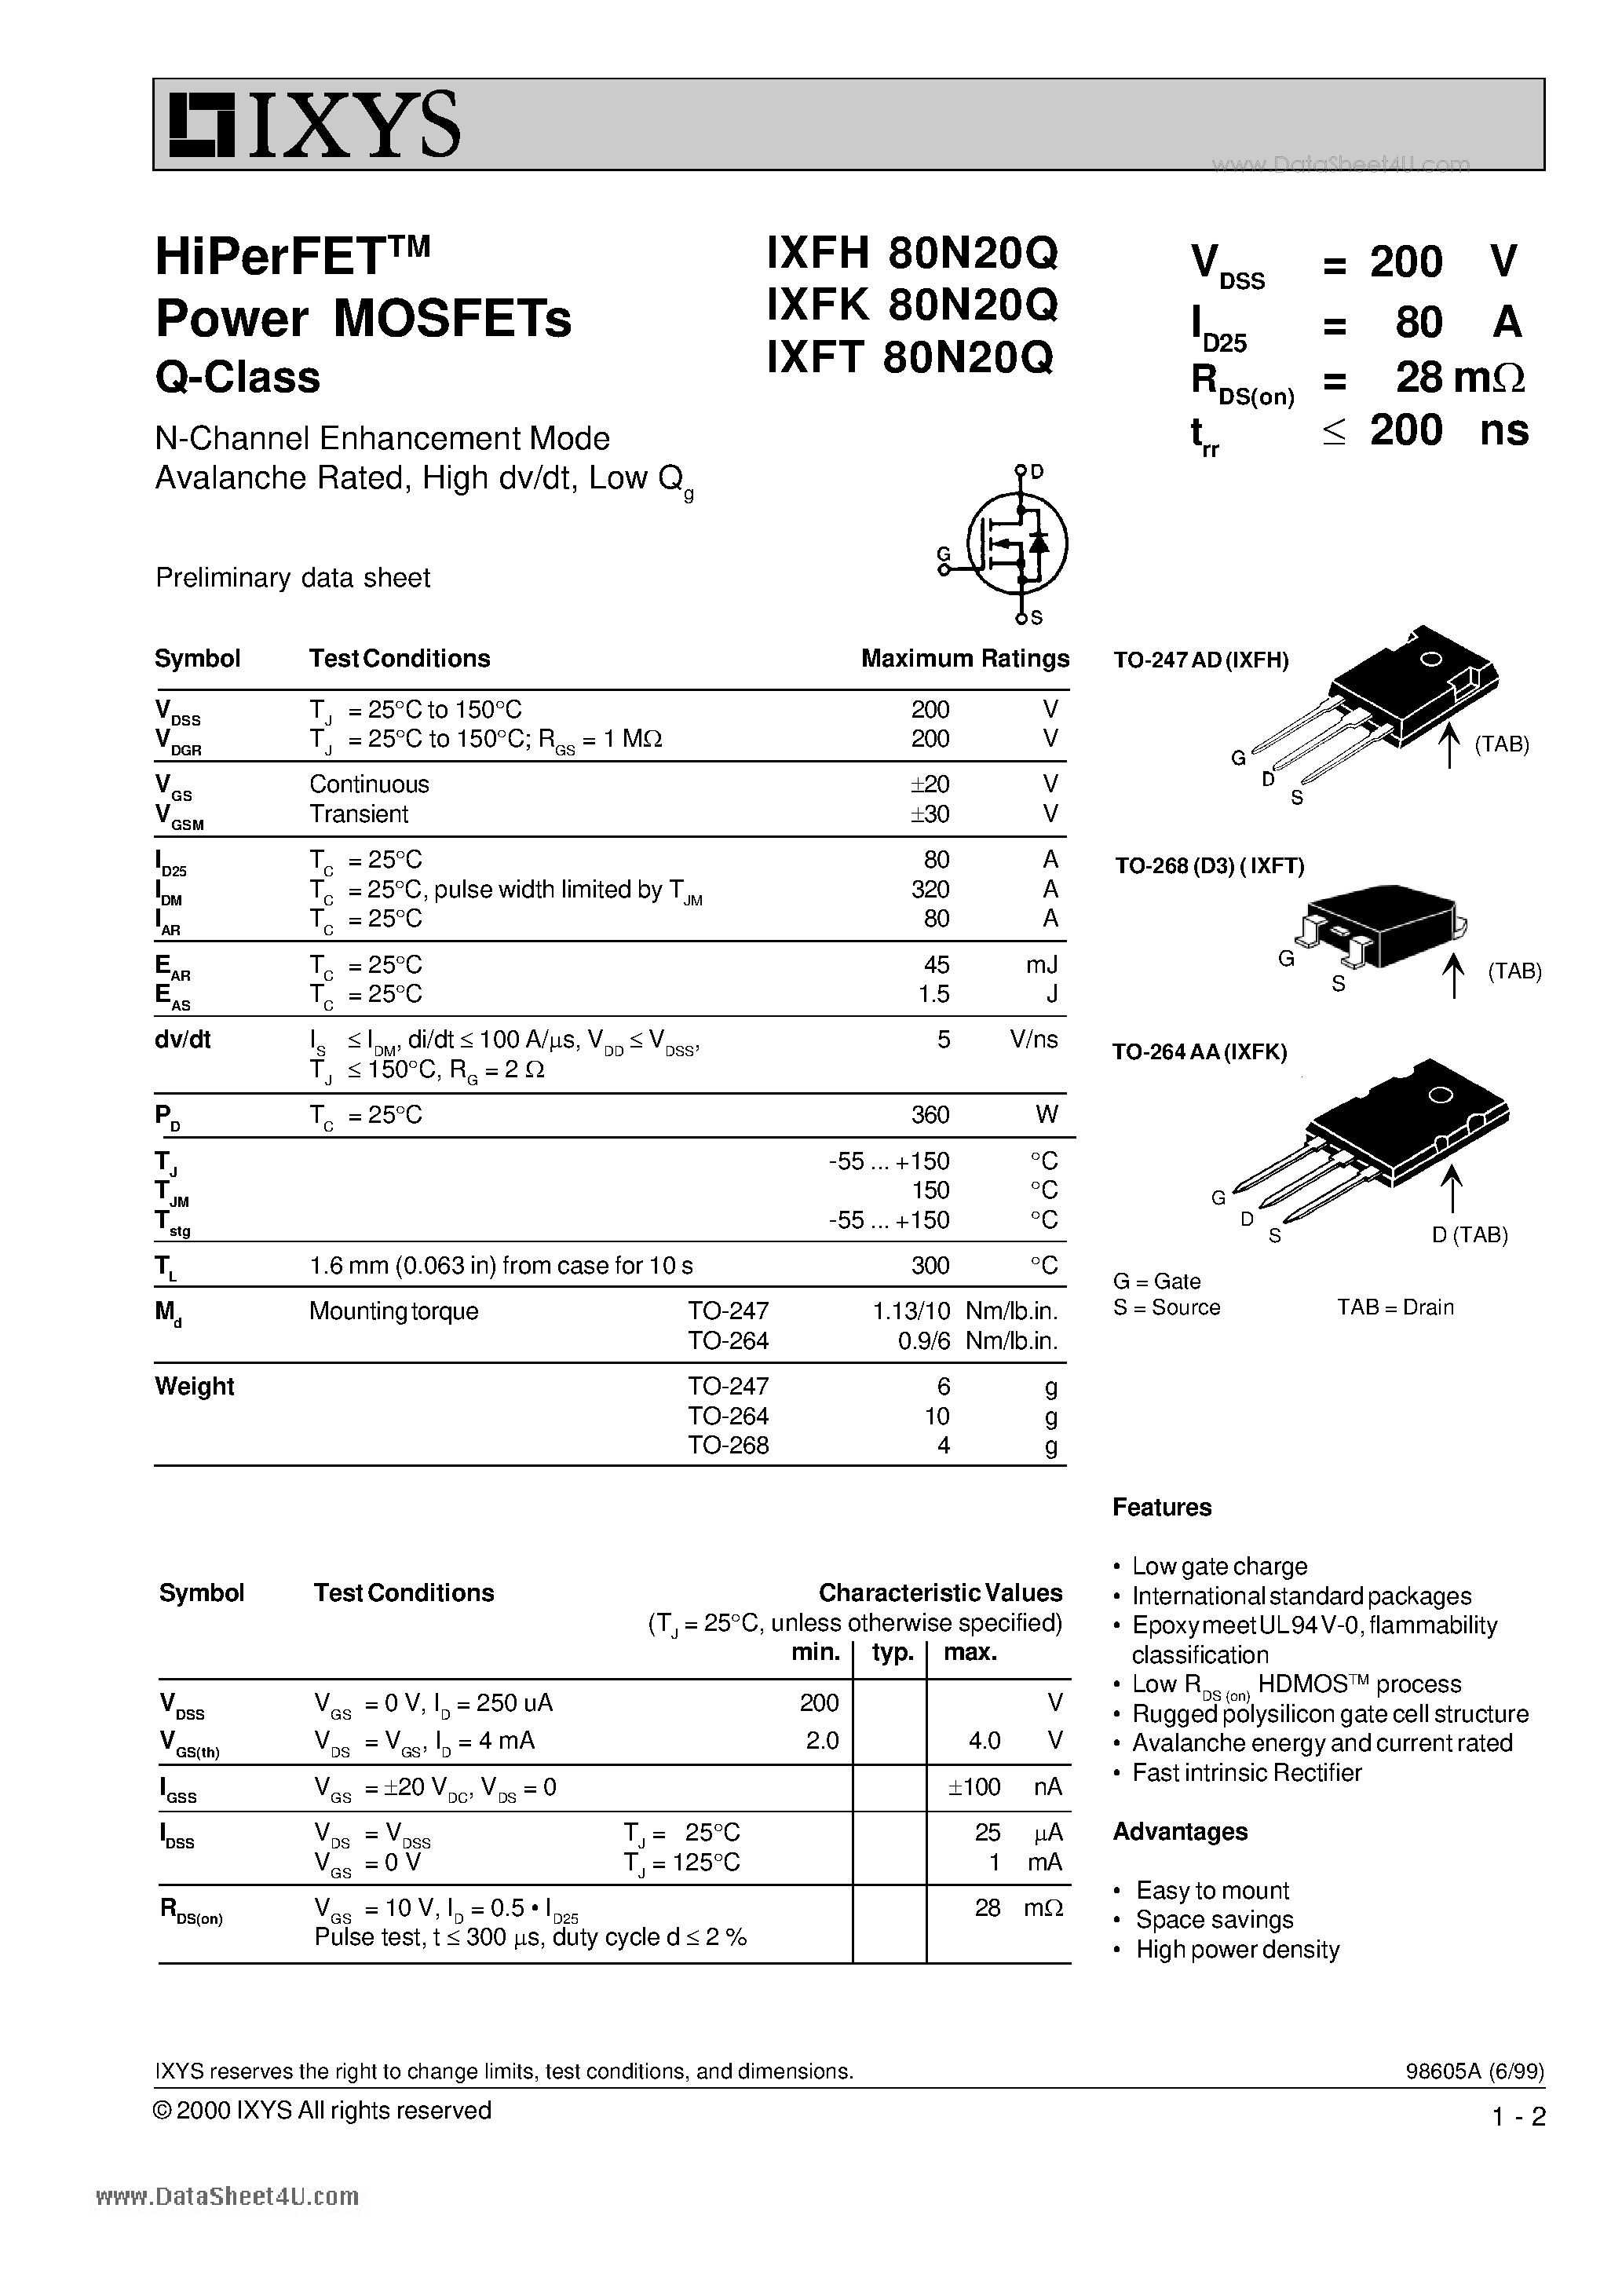 Datasheet IXFH80N20Q - Power MOSFETs Q-Class page 1